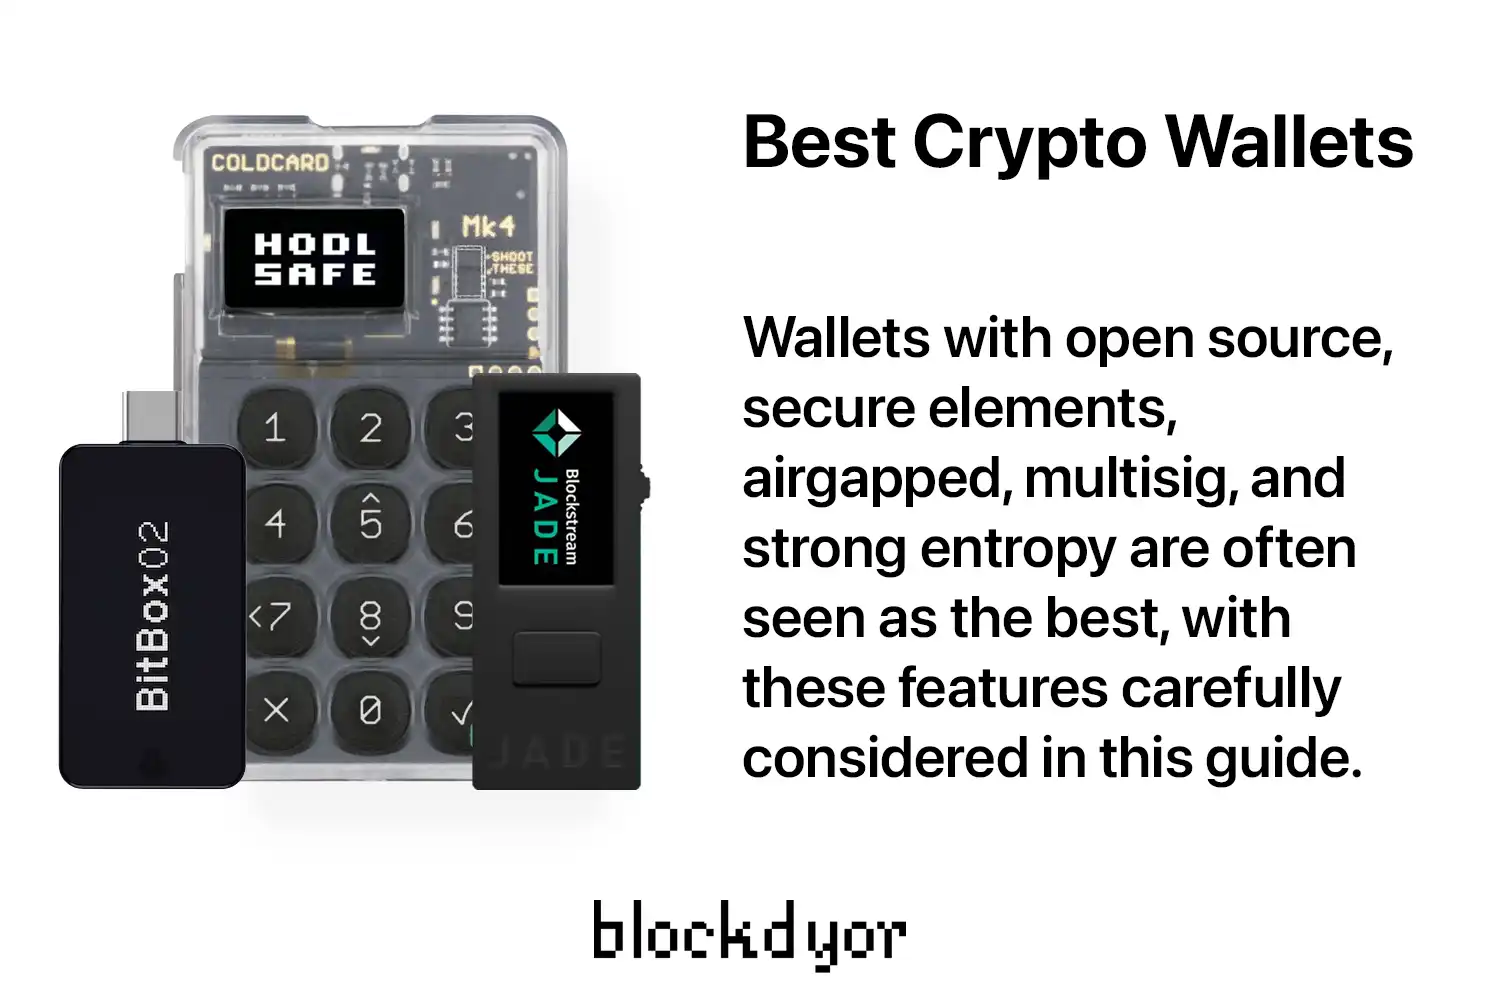 Best Crypto Wallets Overview